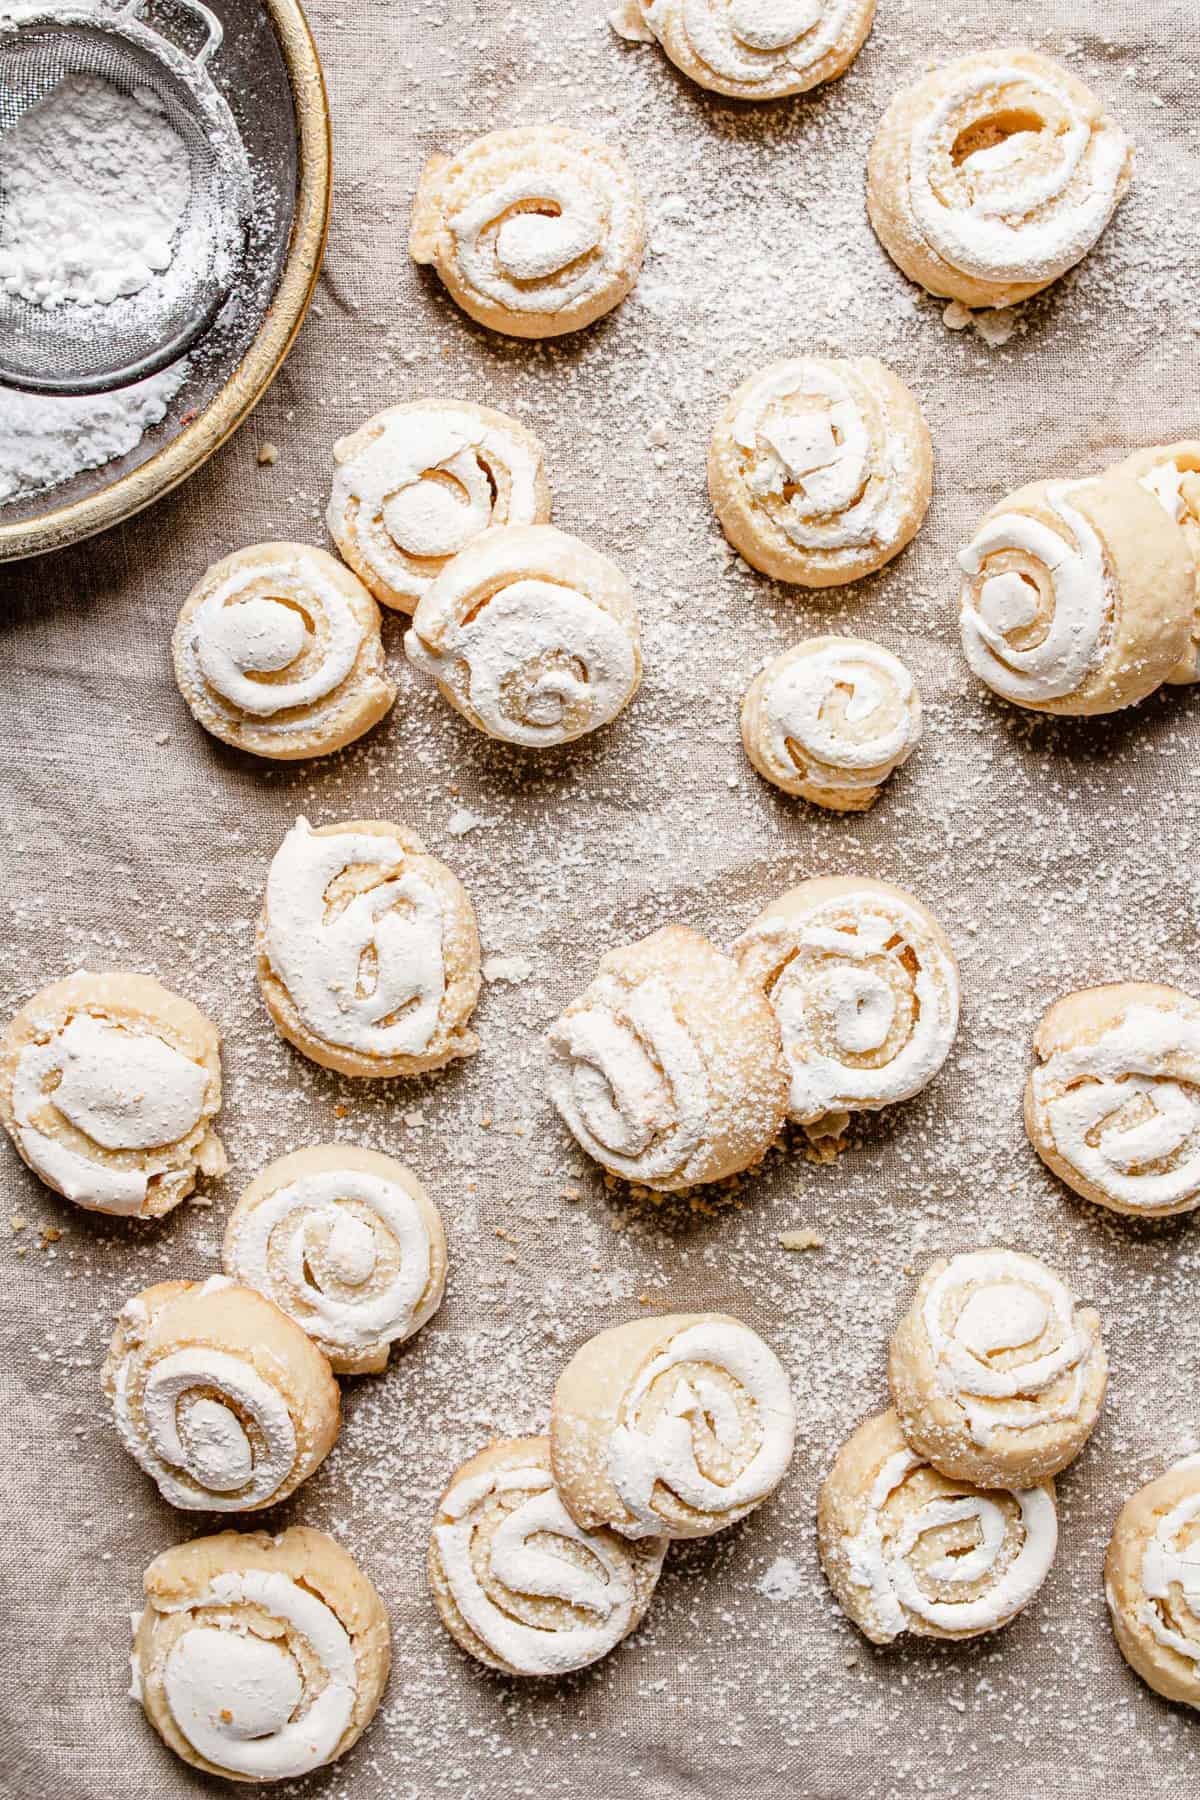 Butter meringue cookies dusted with powdered sugar